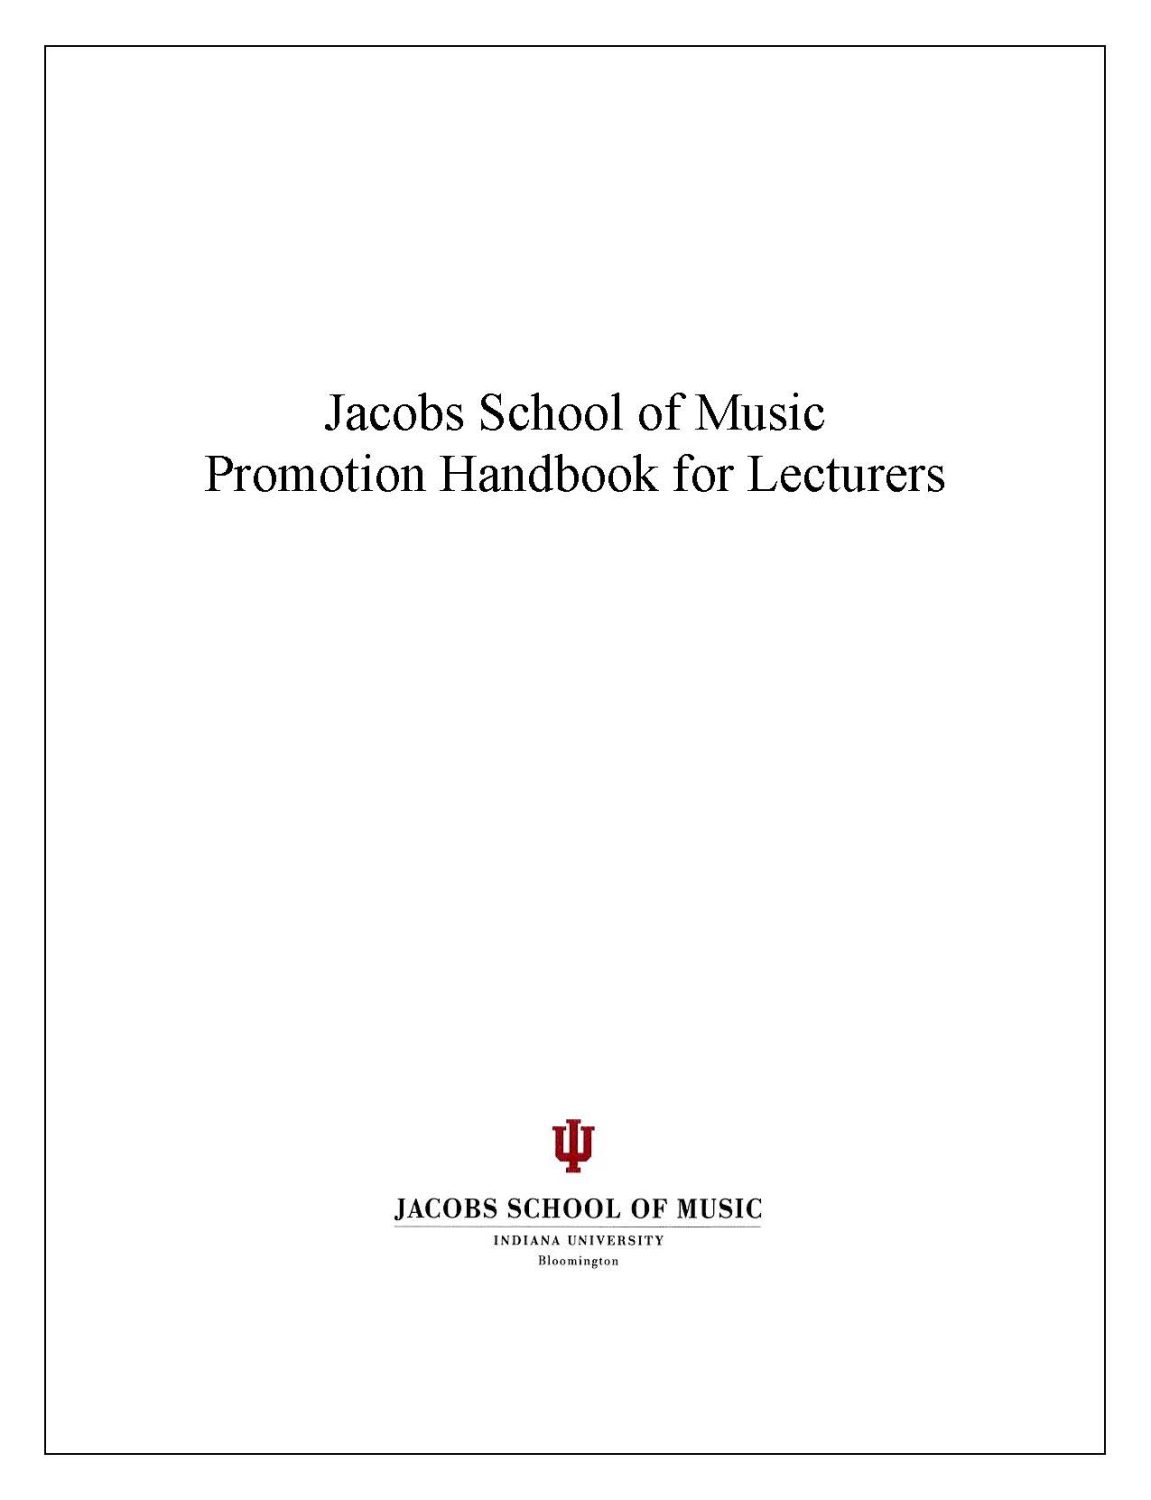 Cover image for Jacobs School of Music Promotion Handbook for Lecturers